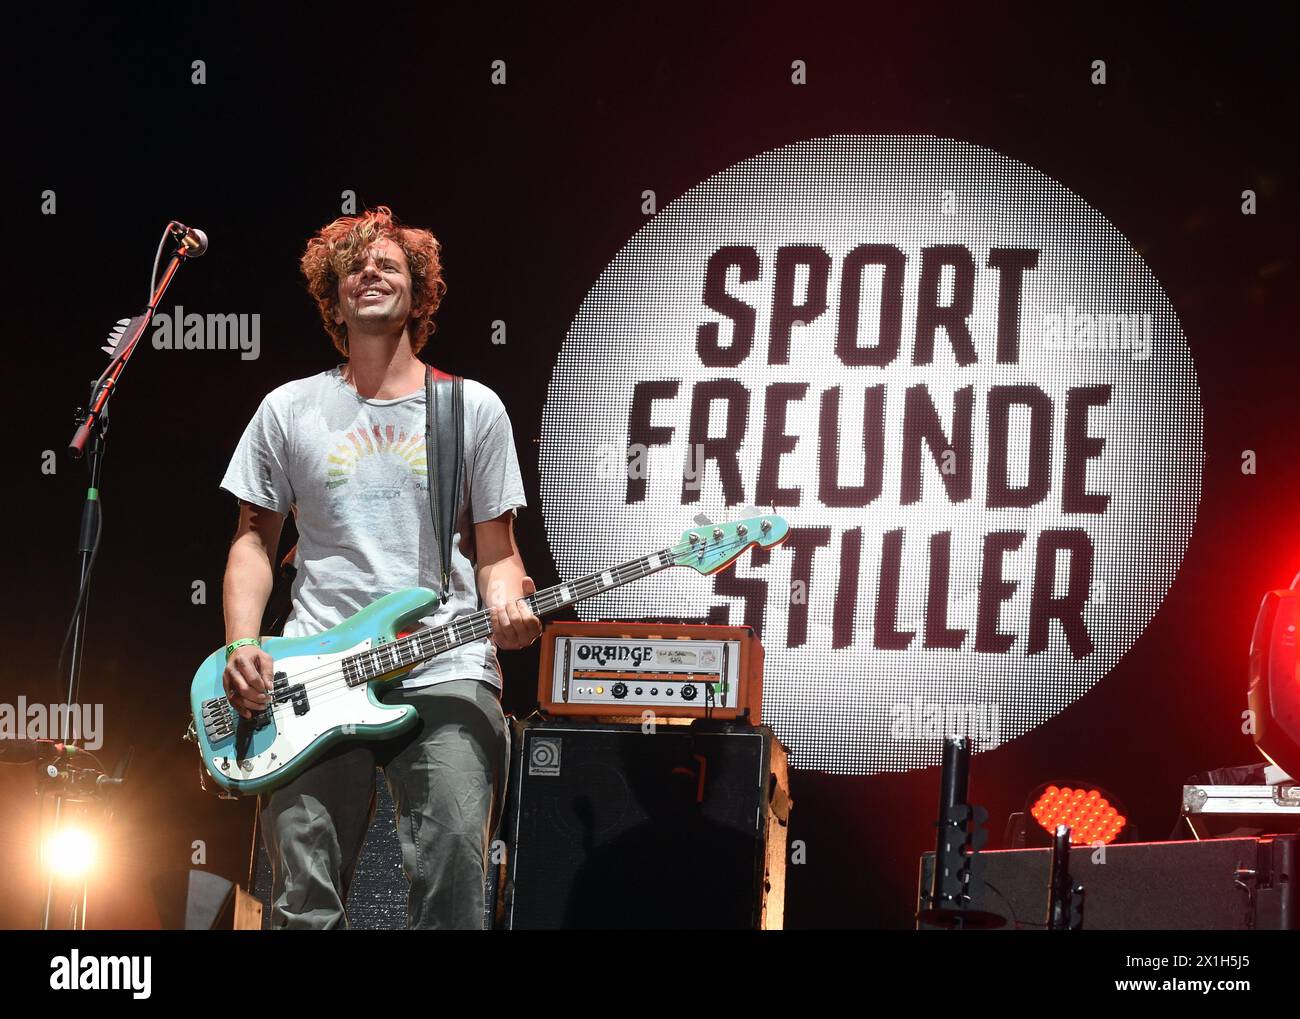 Austrian music festival 'Frequency 2016' on 19 th August 2016. The festival runs from 18 to 20 August 2016. PICTURE:  Rüdiger 'Rüde' Linhofvon  of the band 'Sportfreunde Stiller' - 20160819 PD9475 - Rechteinfo: Rights Managed (RM) Stock Photo